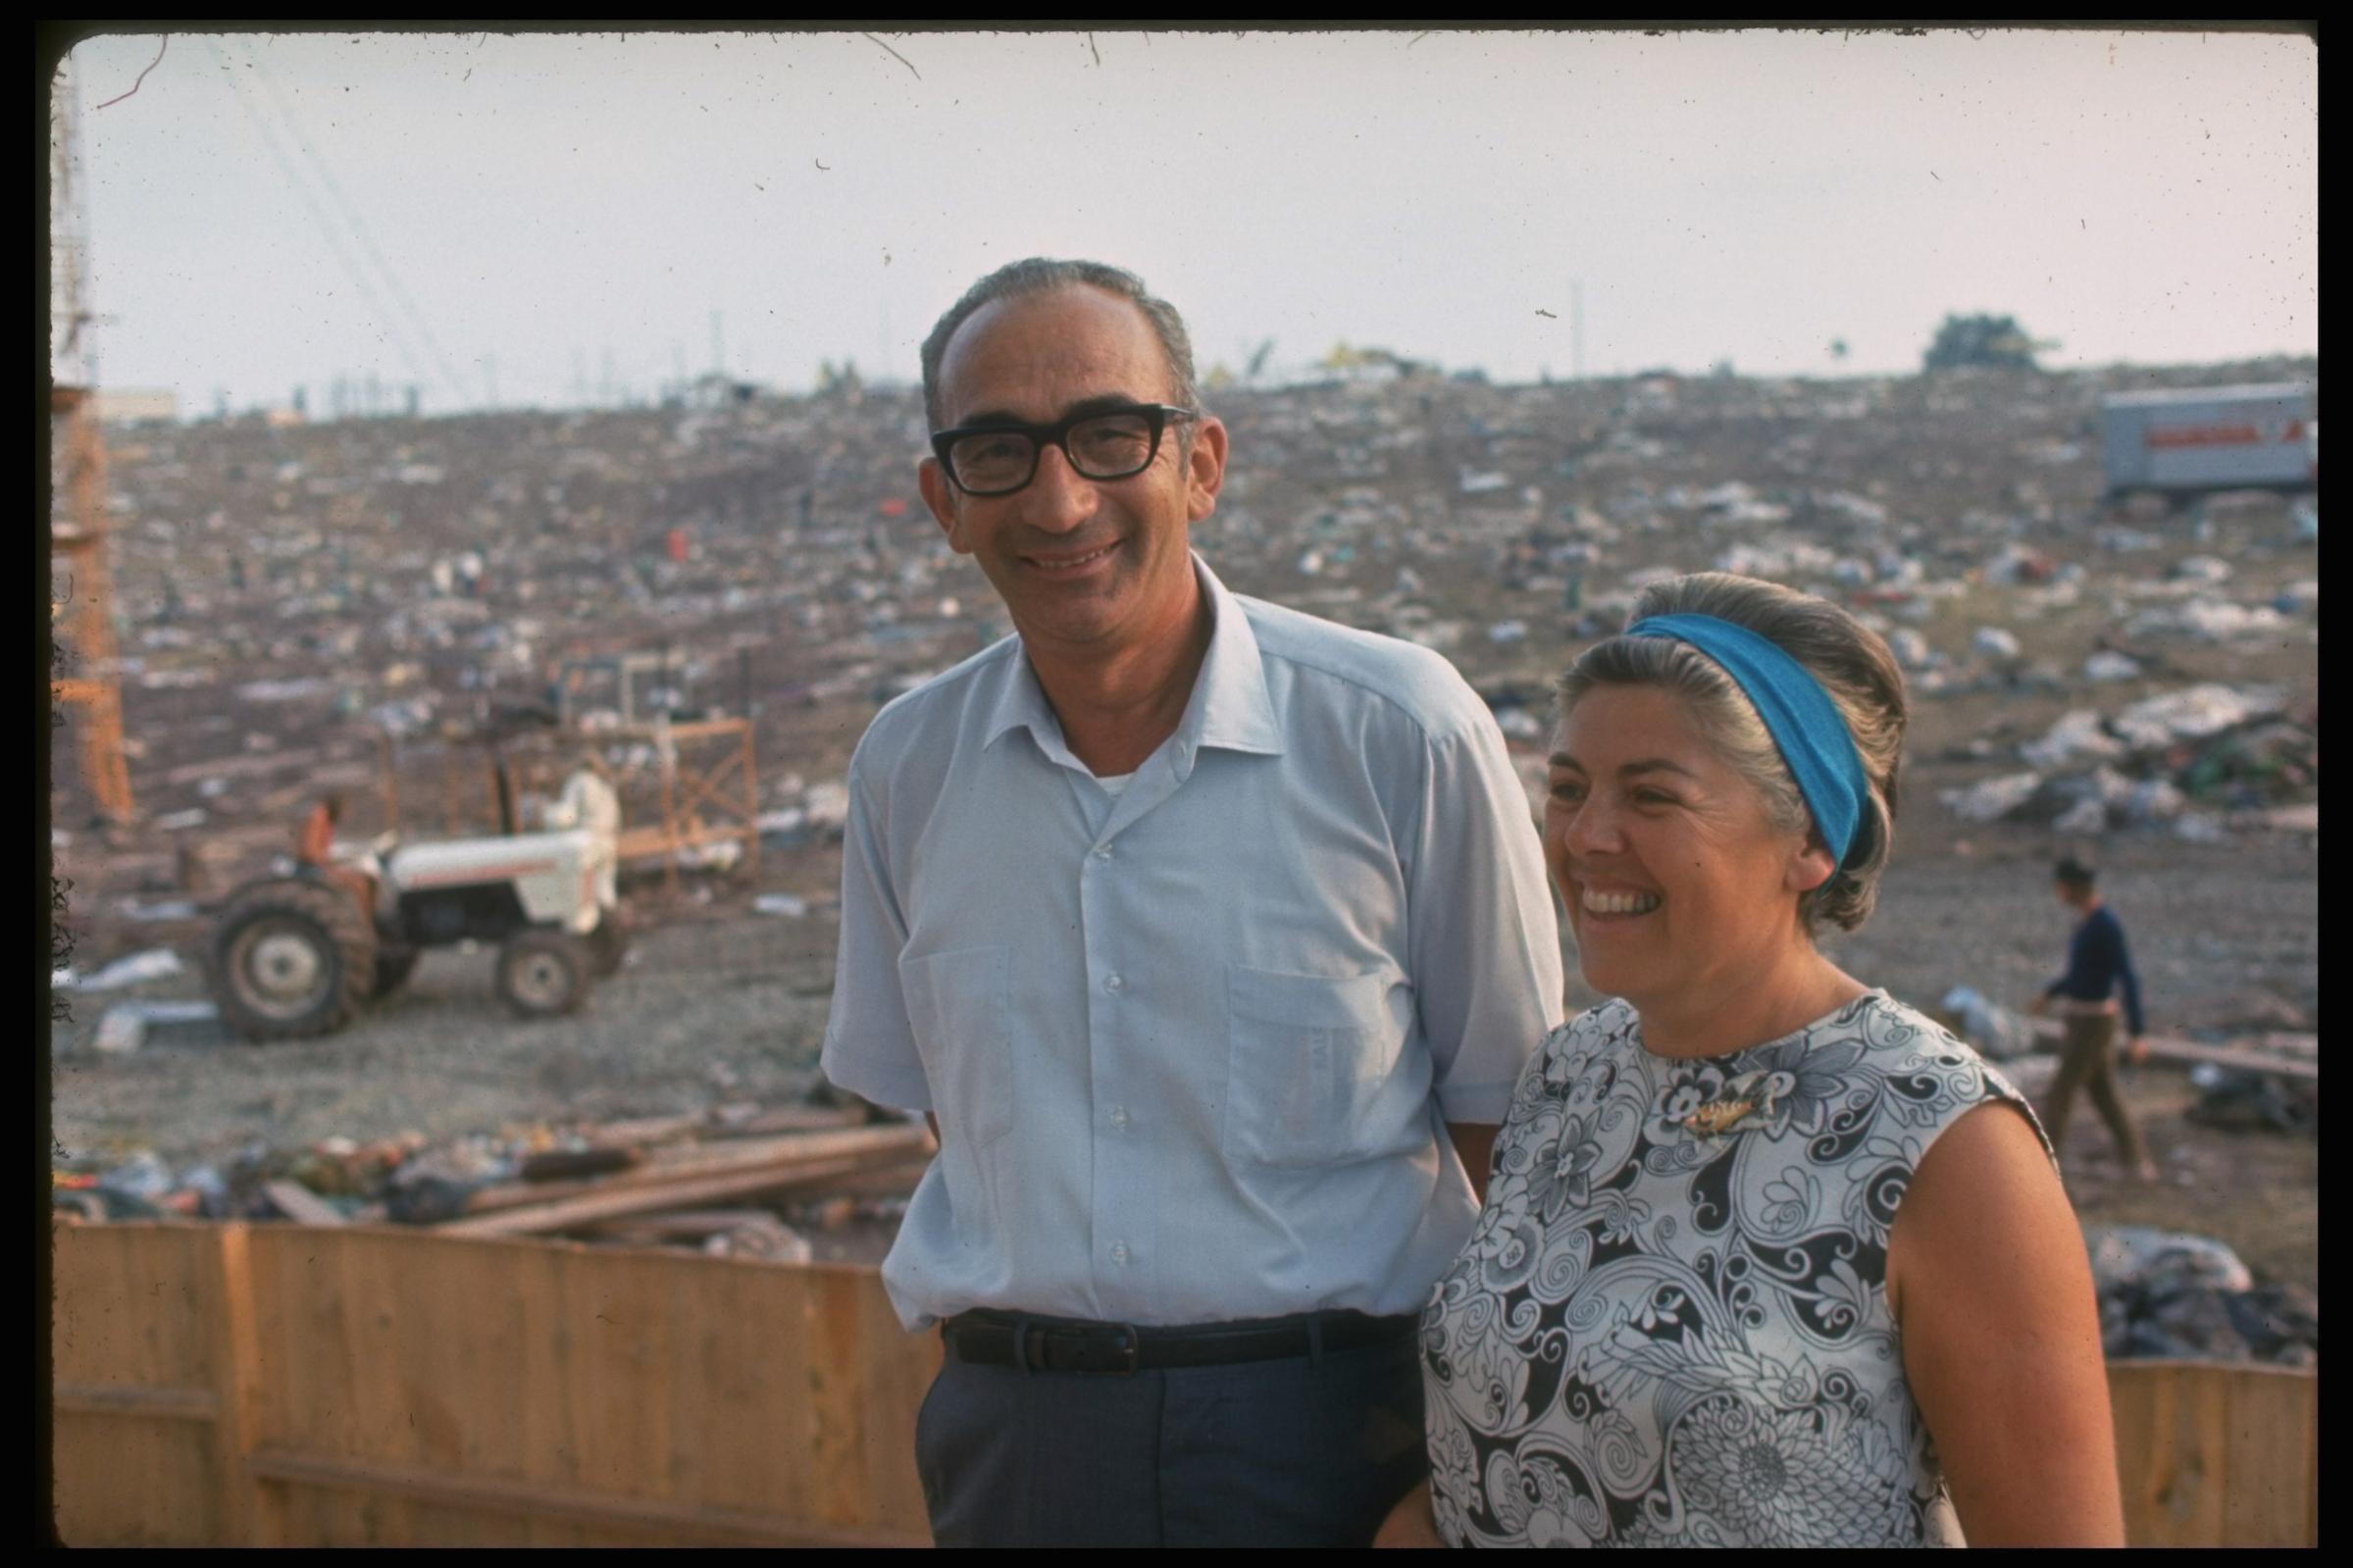 Max and Miriam Yasgur on their land after the Woodstock Music &amp; Art Fair.